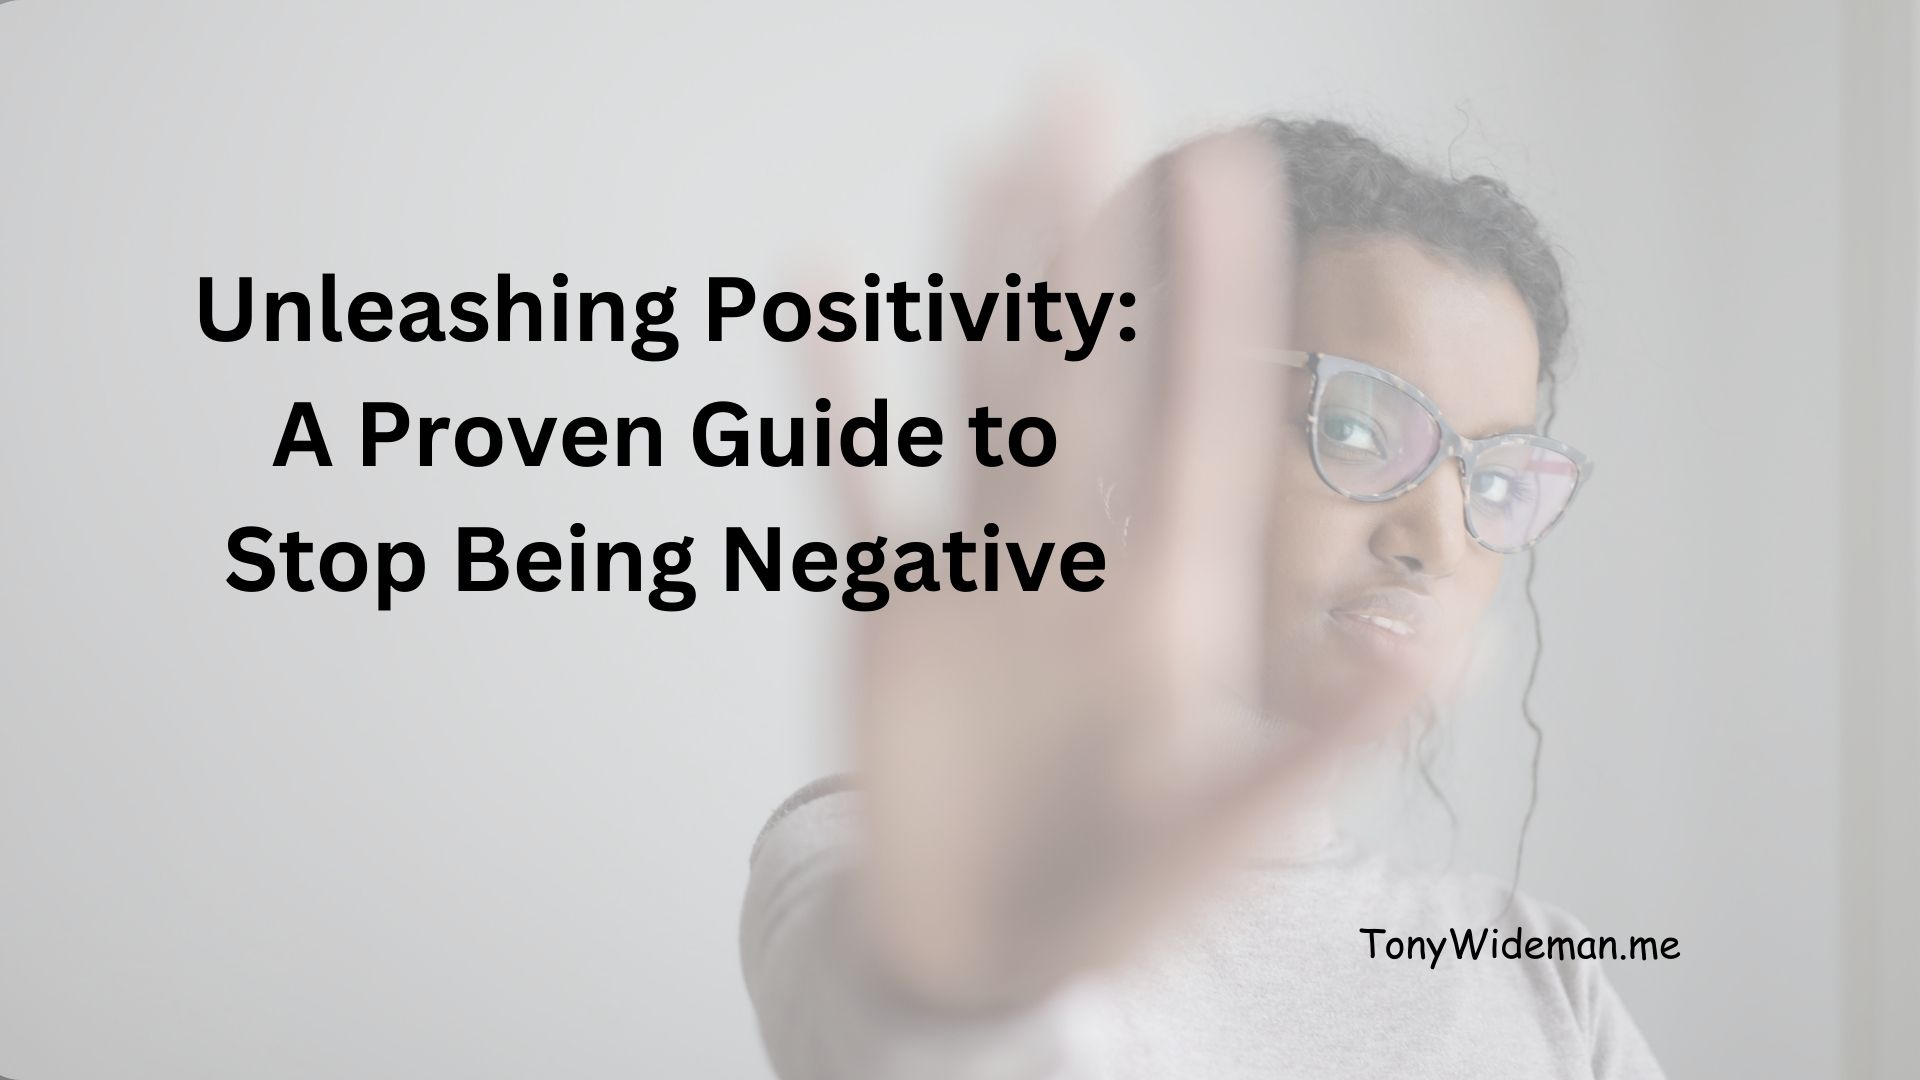 Unleashing Positivity: A Proven Guide to Stop Being Negative